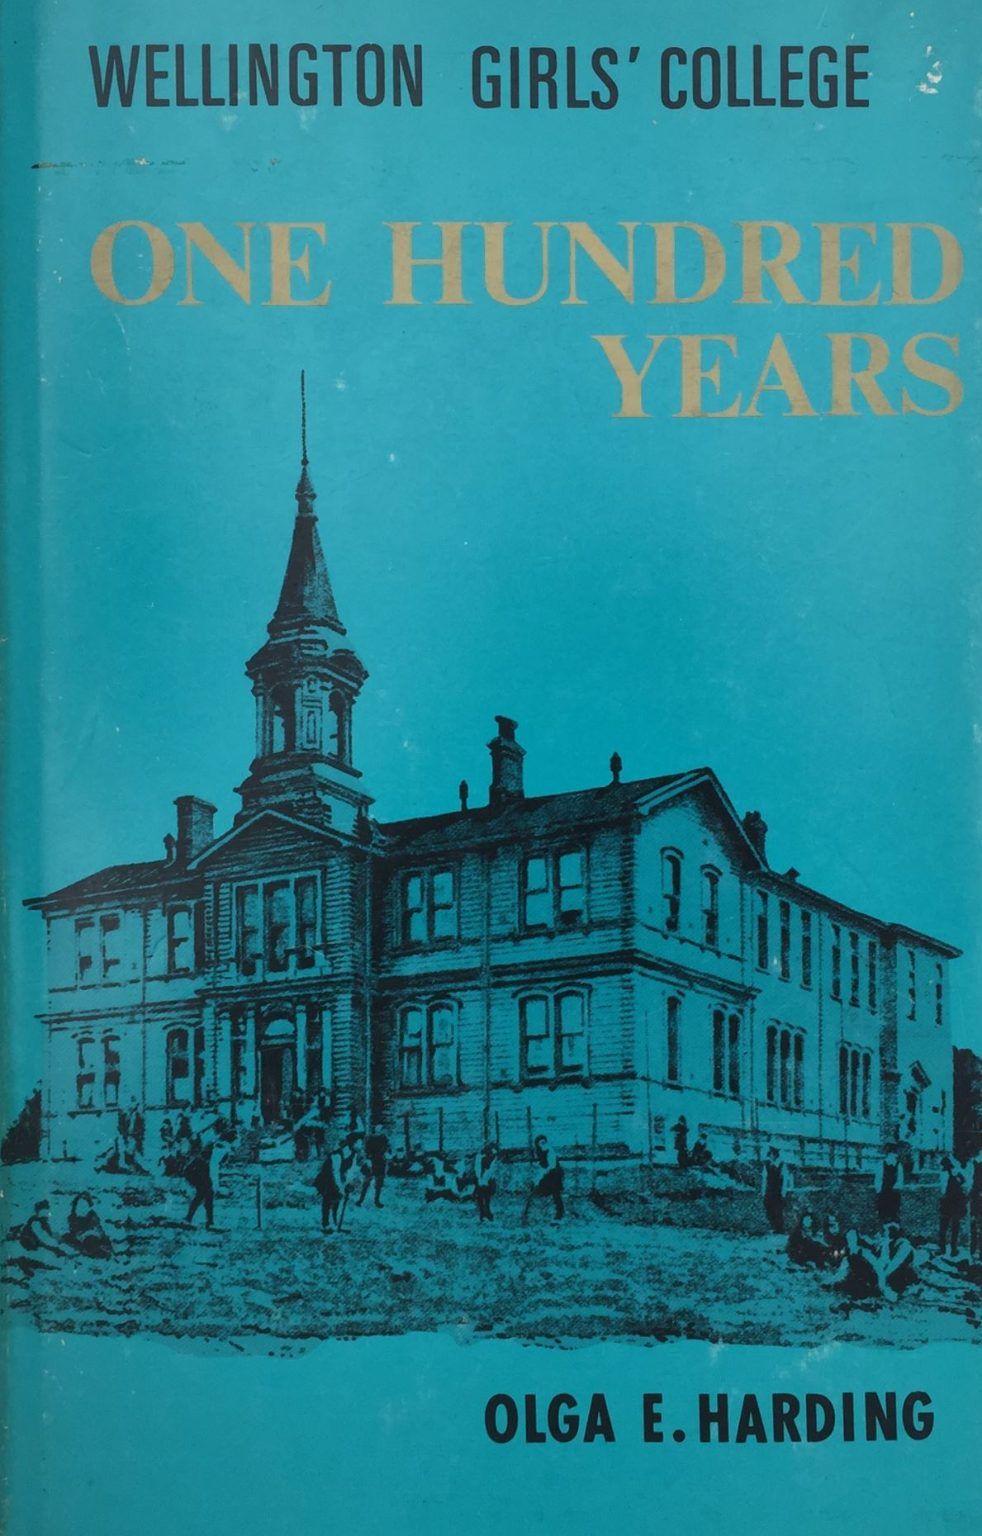 WELLINGTON GIRLS COLLEGE: One Hundred Years